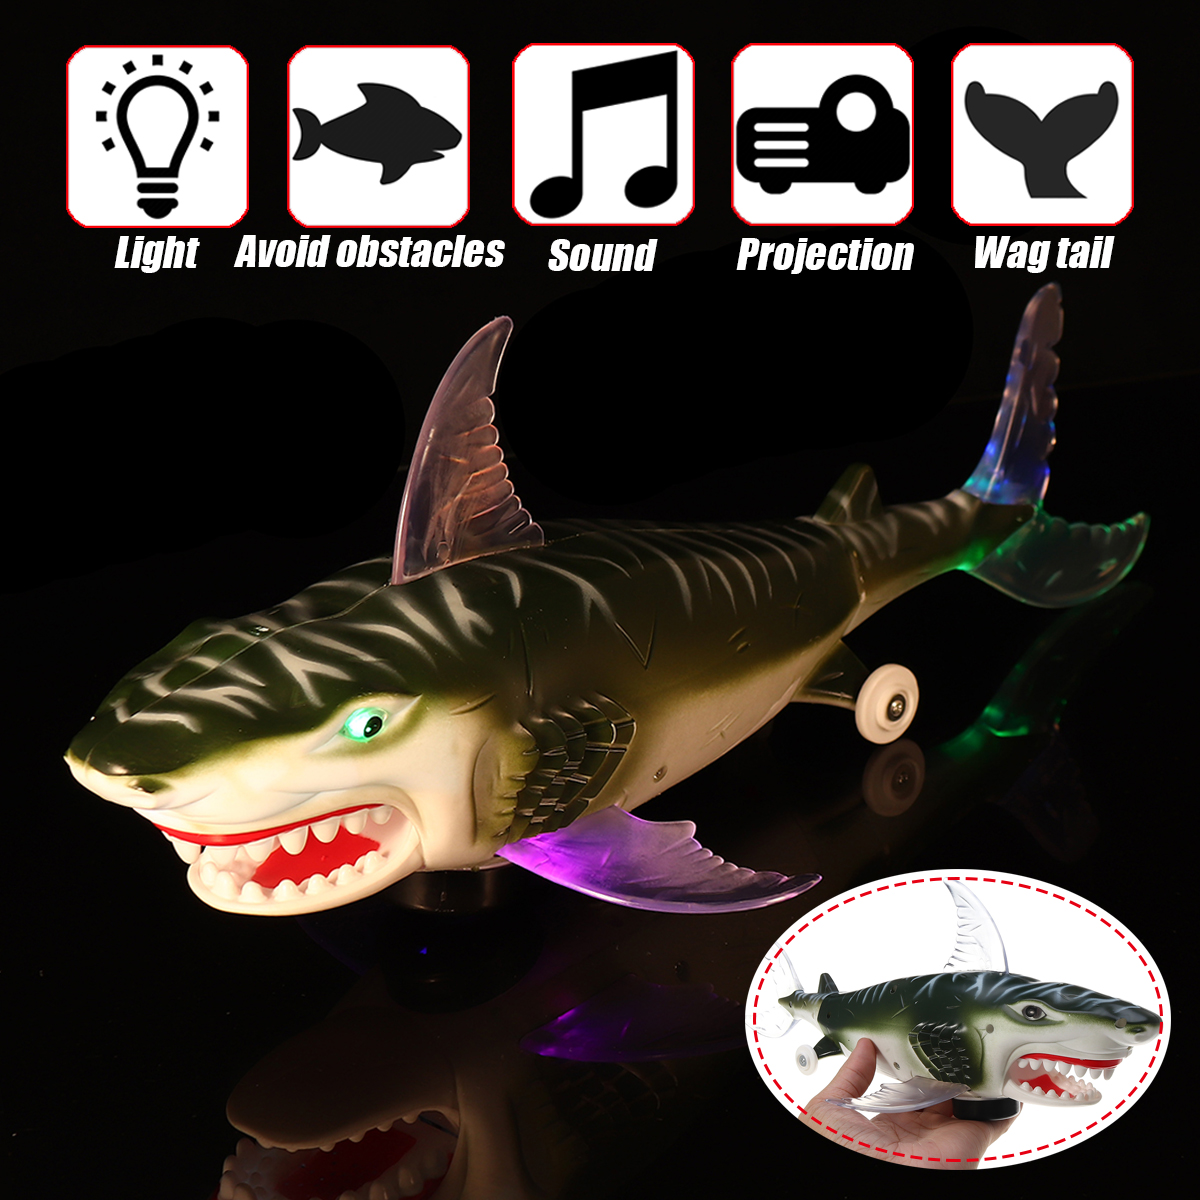 Electric-Projection-Light-Sound-Shark-Walking-Animal-Educational-Toys-for-Kids-Gift-1678213-2